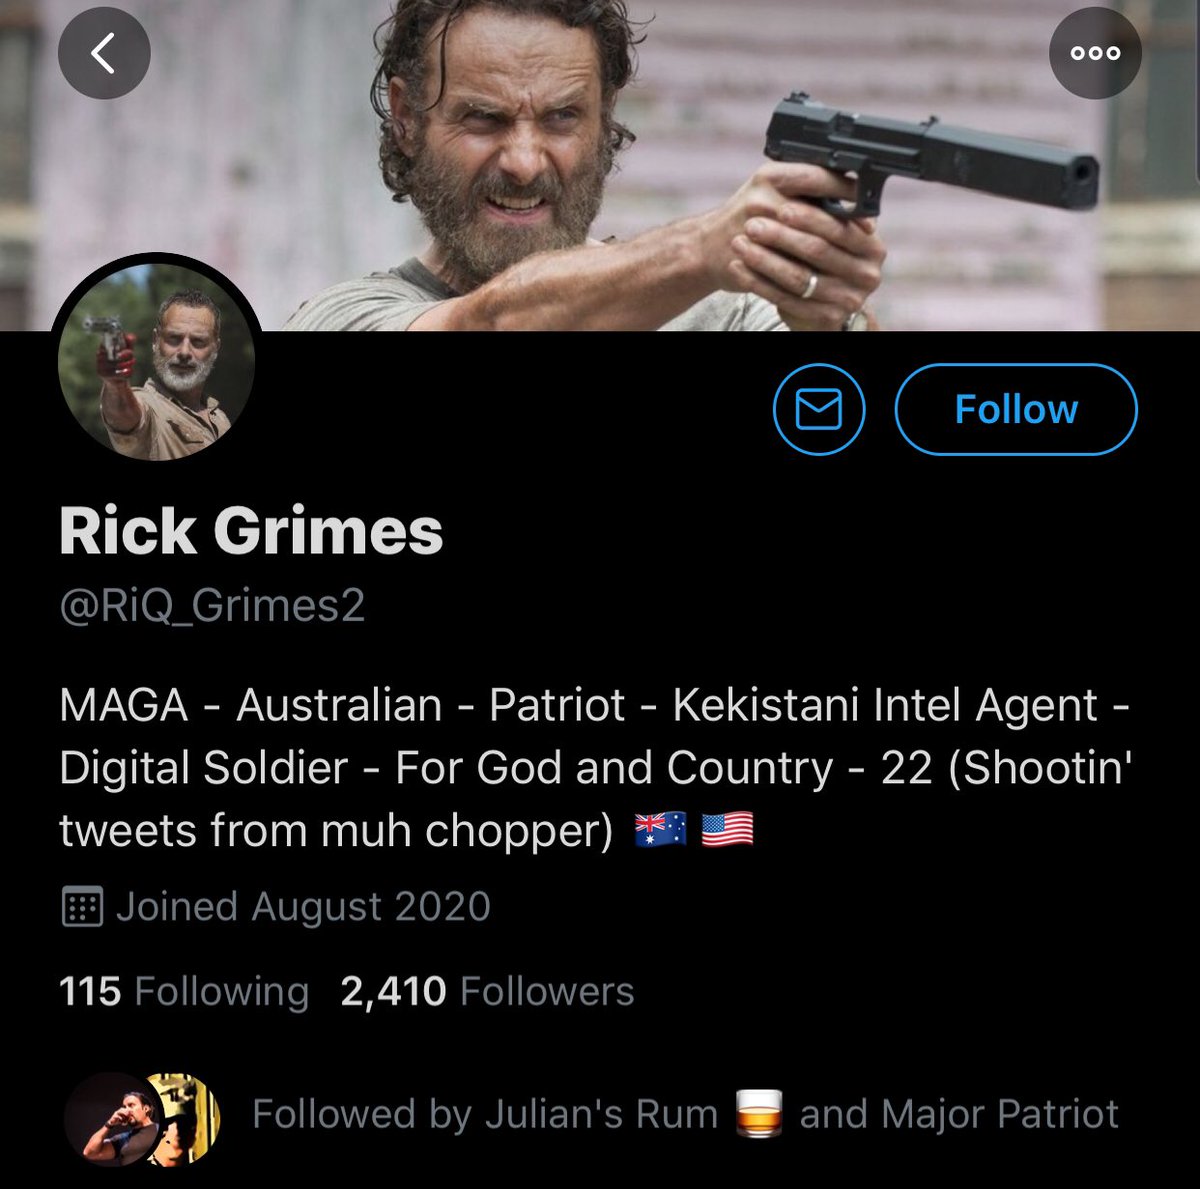 33. Rick Grimes got banned and is on a new ban evasion account. Shocking that a Walking Dead character would rise from the grave.